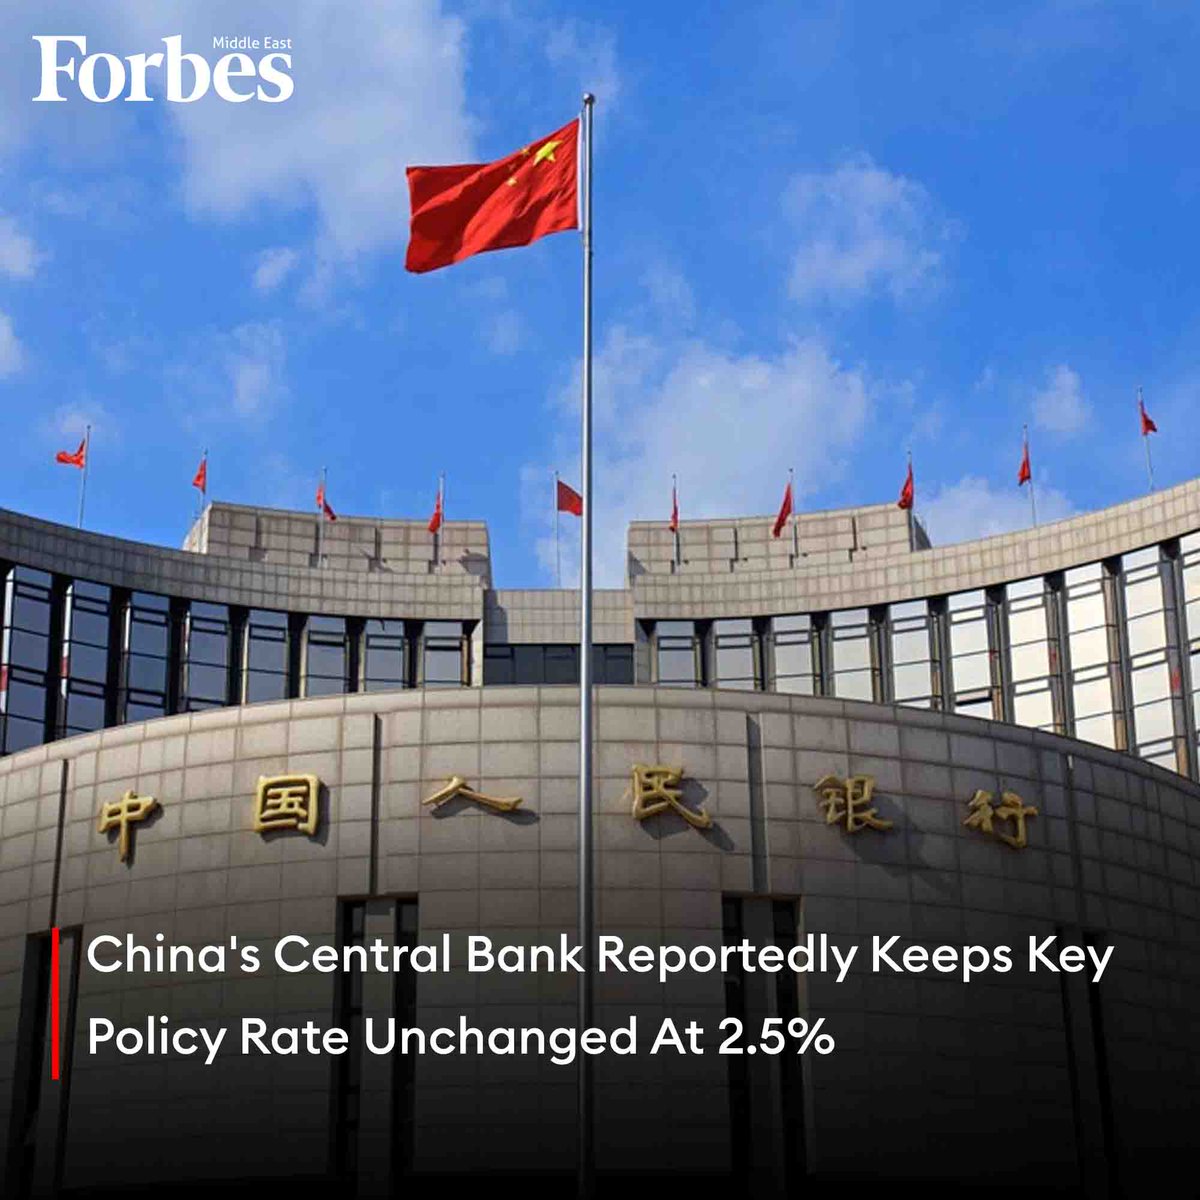 The People's Bank of #China has reportedly decided to keep its one-year medium-term lending facility (MLF) loan rate at 2.5%, in line with market expectations. 

#Forbes 

For More Details: on.forbesmiddleeast.com/ub22